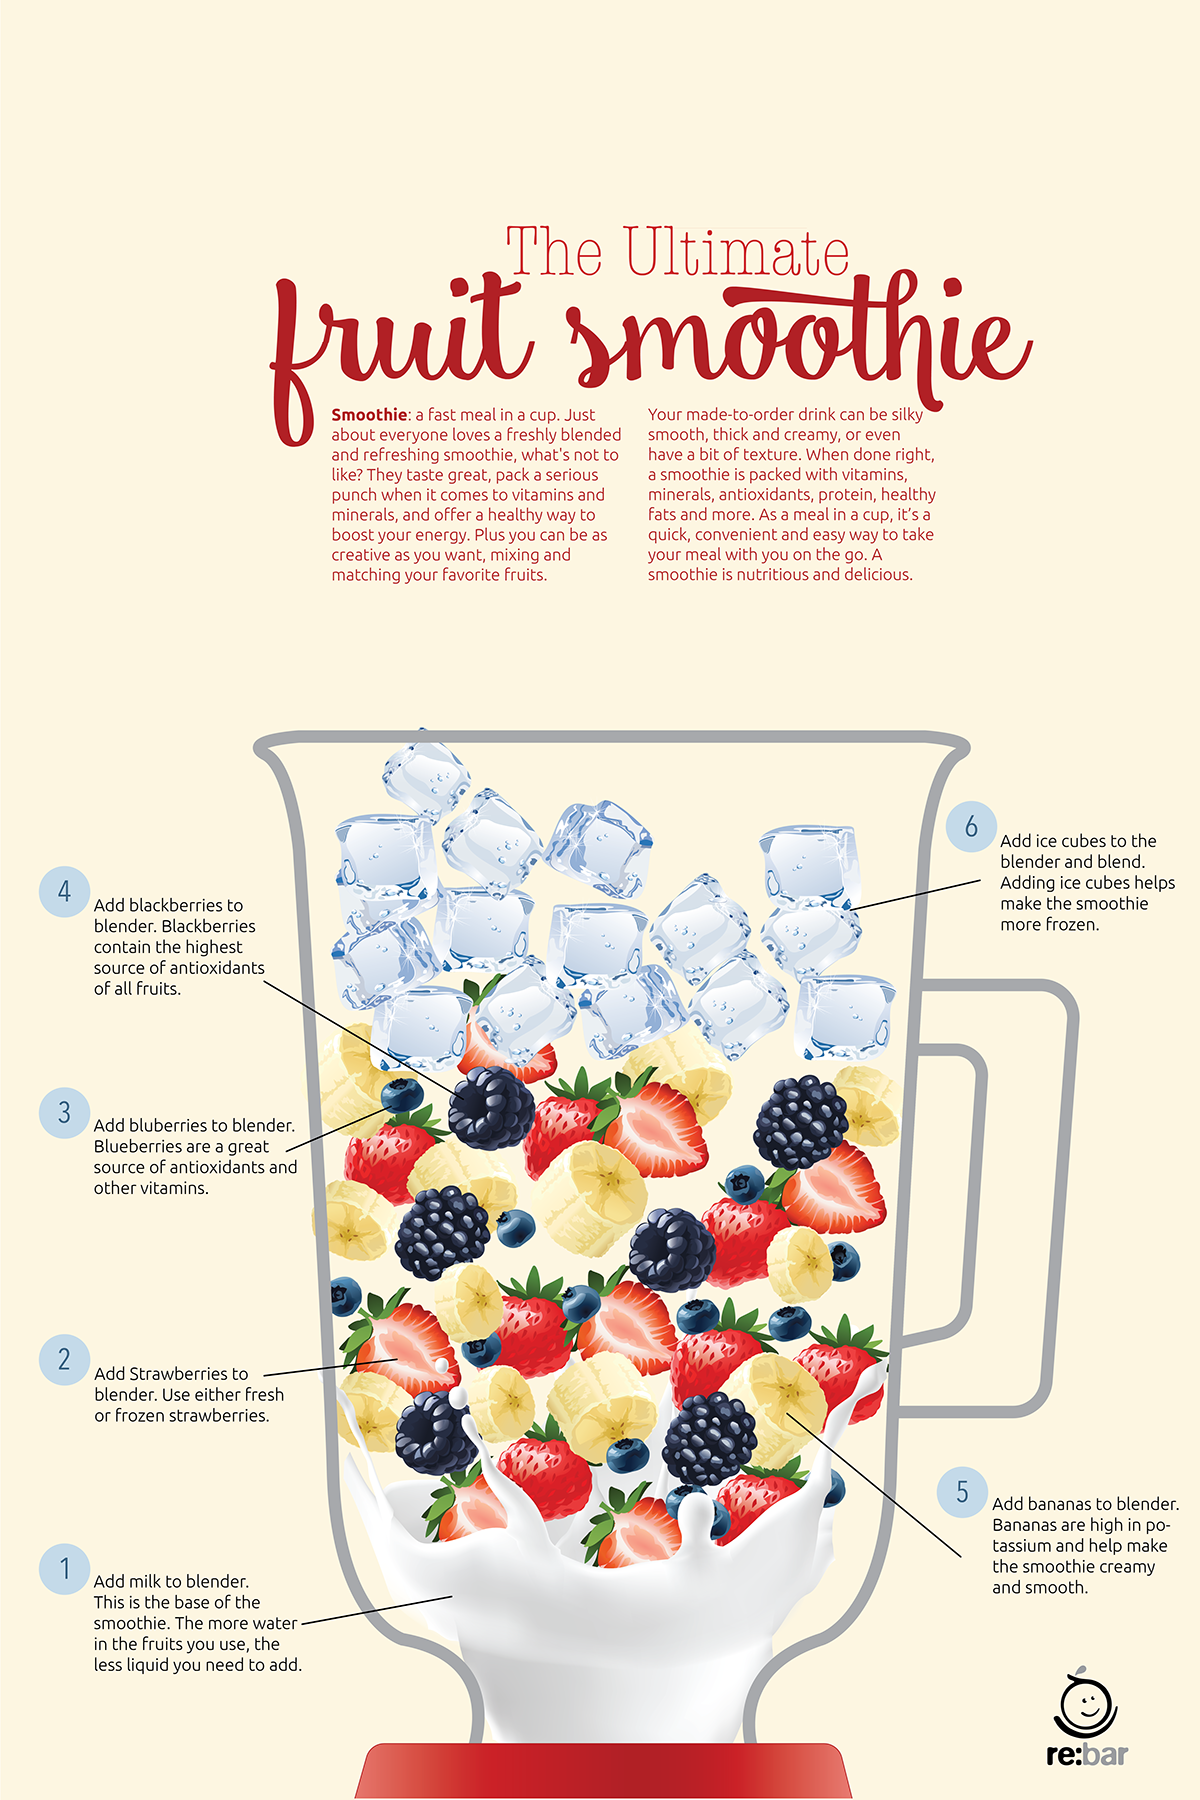 How to Make the Ultimate Fruit Smoothie